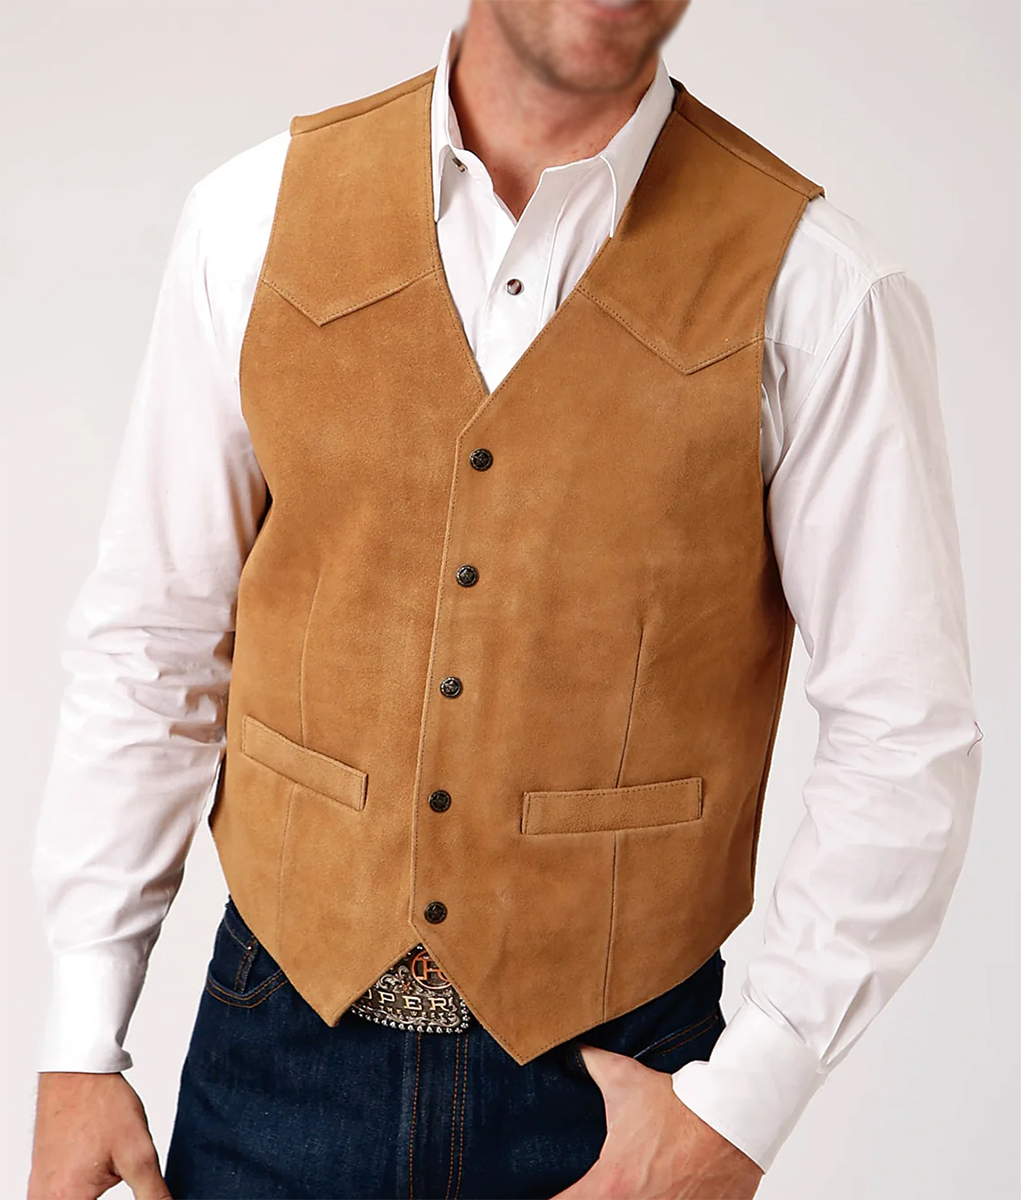 One Day as a Lion Scott Caan Brown Suede Vest